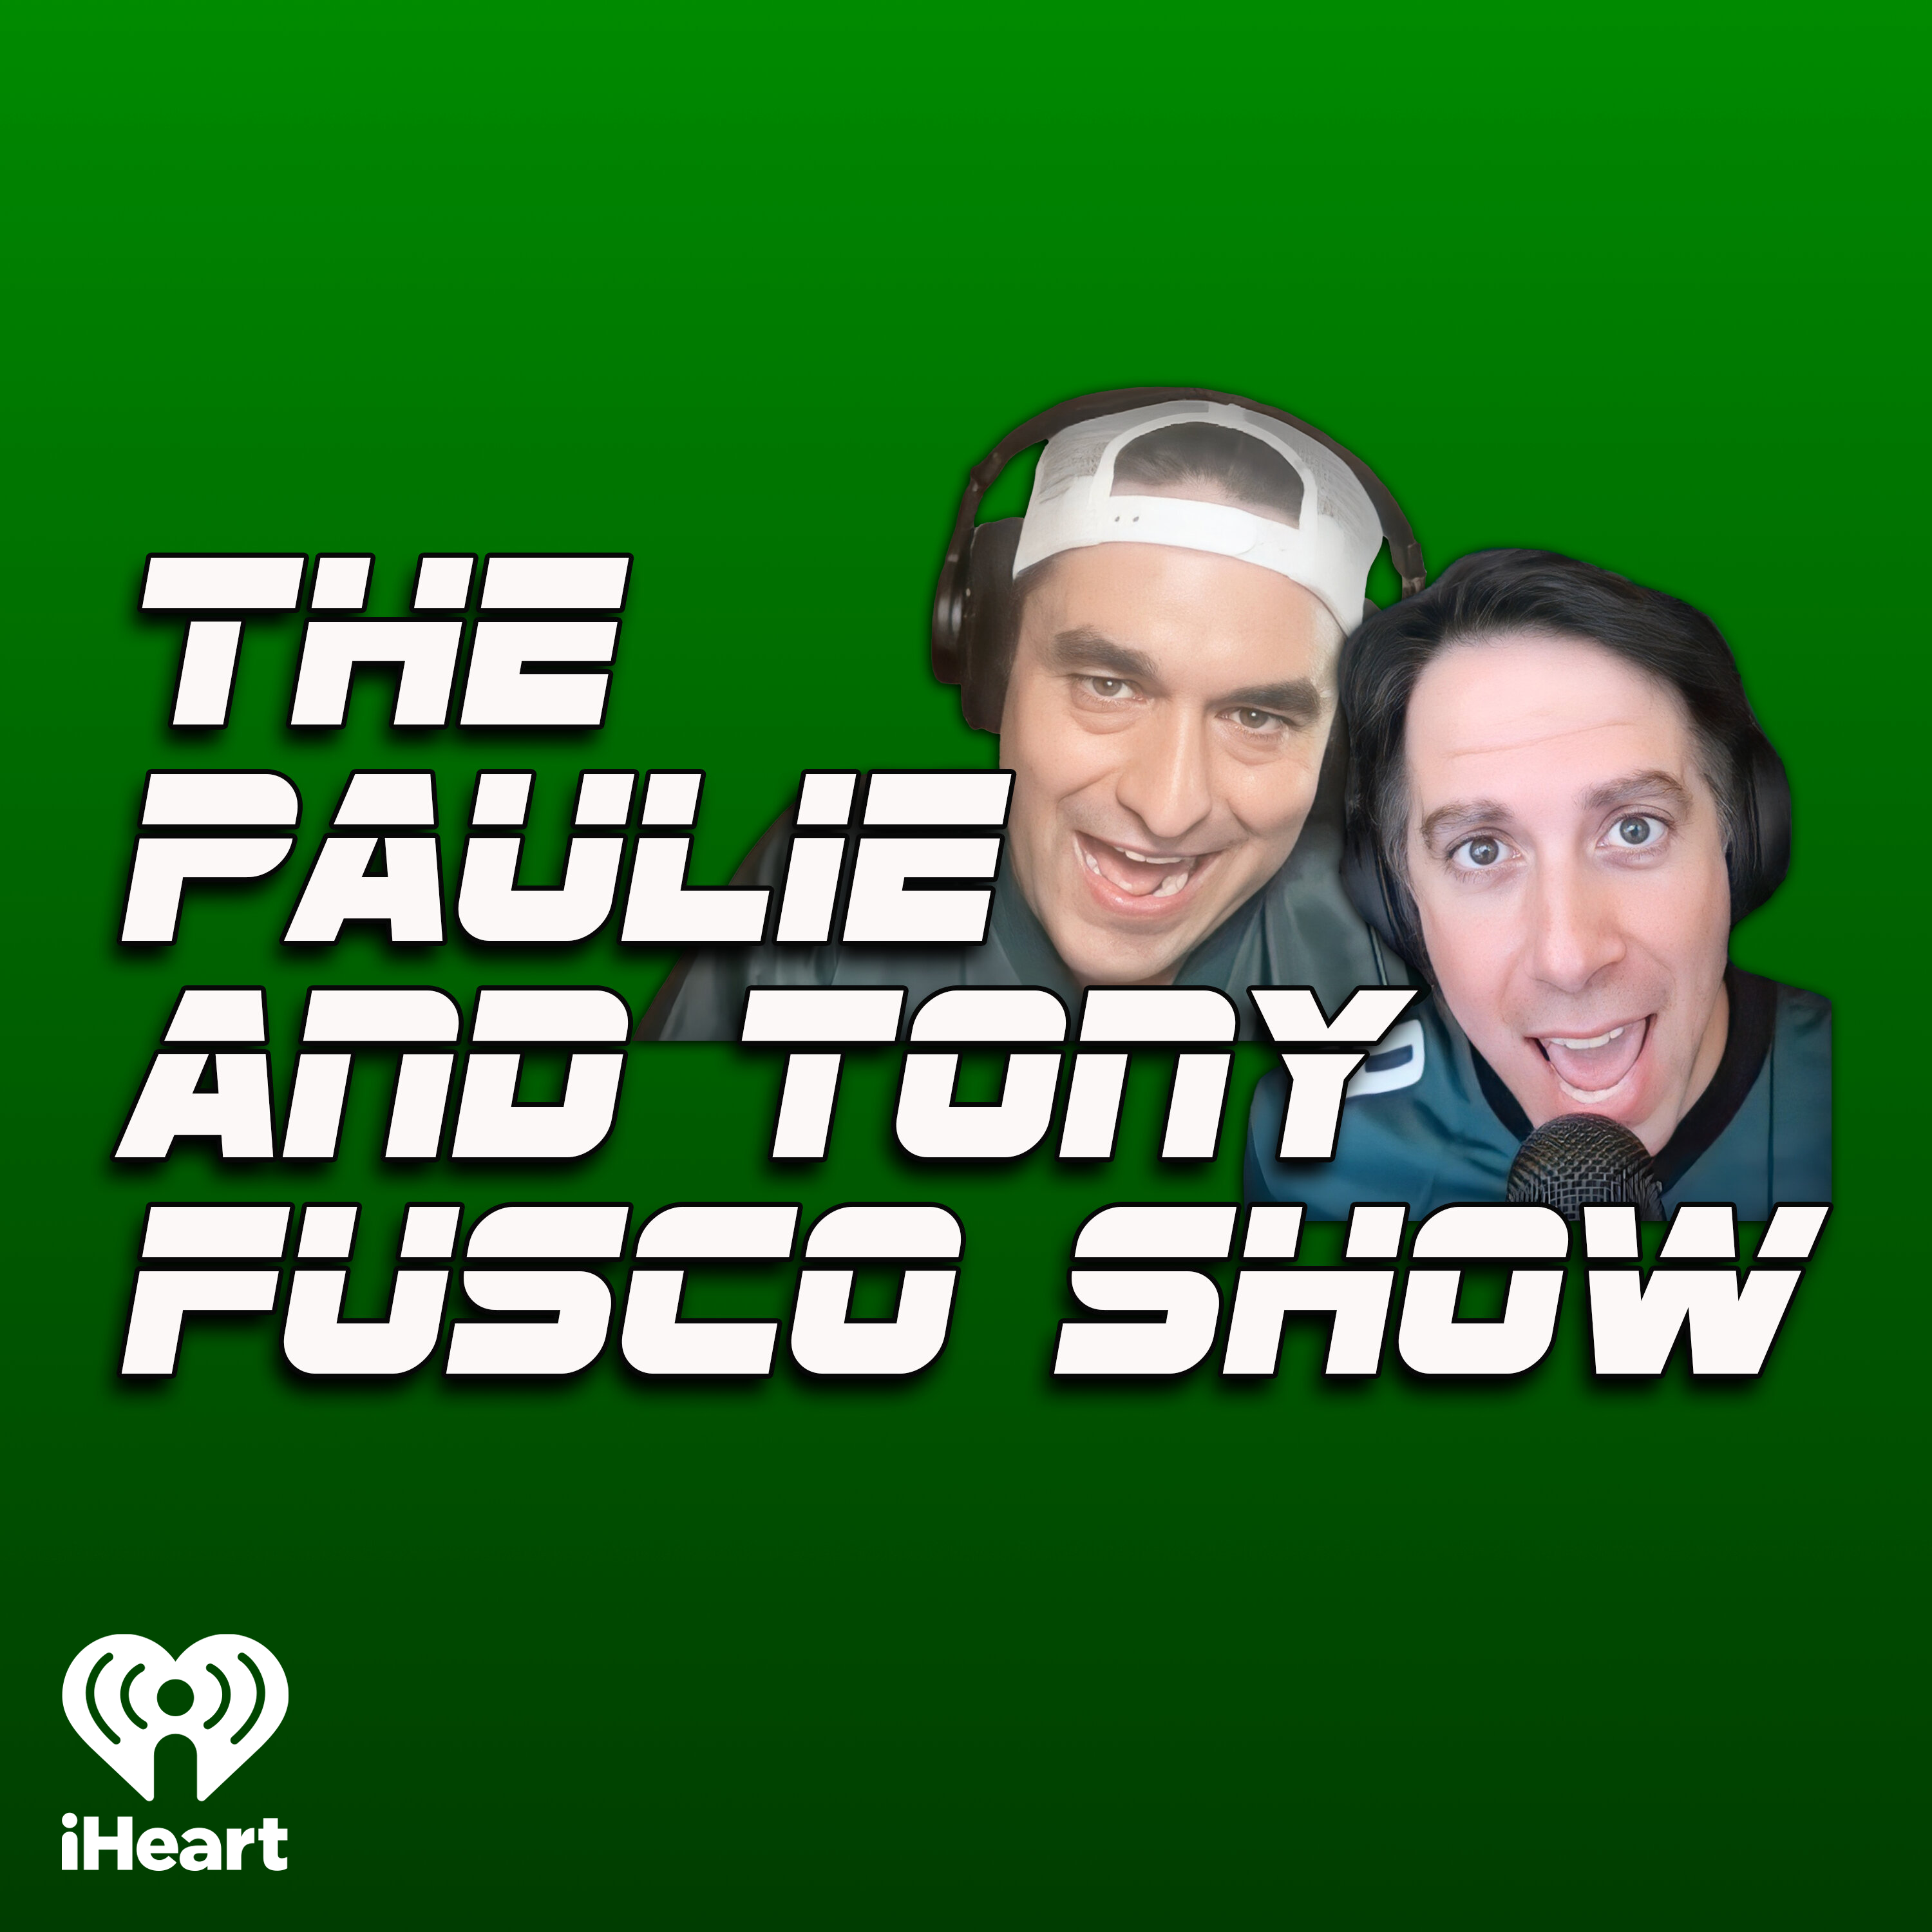 The Paulie & Tony Fusco Show: Kevin Durant's new enemy Jason McIntyre GOES DOWN IN FLAMES